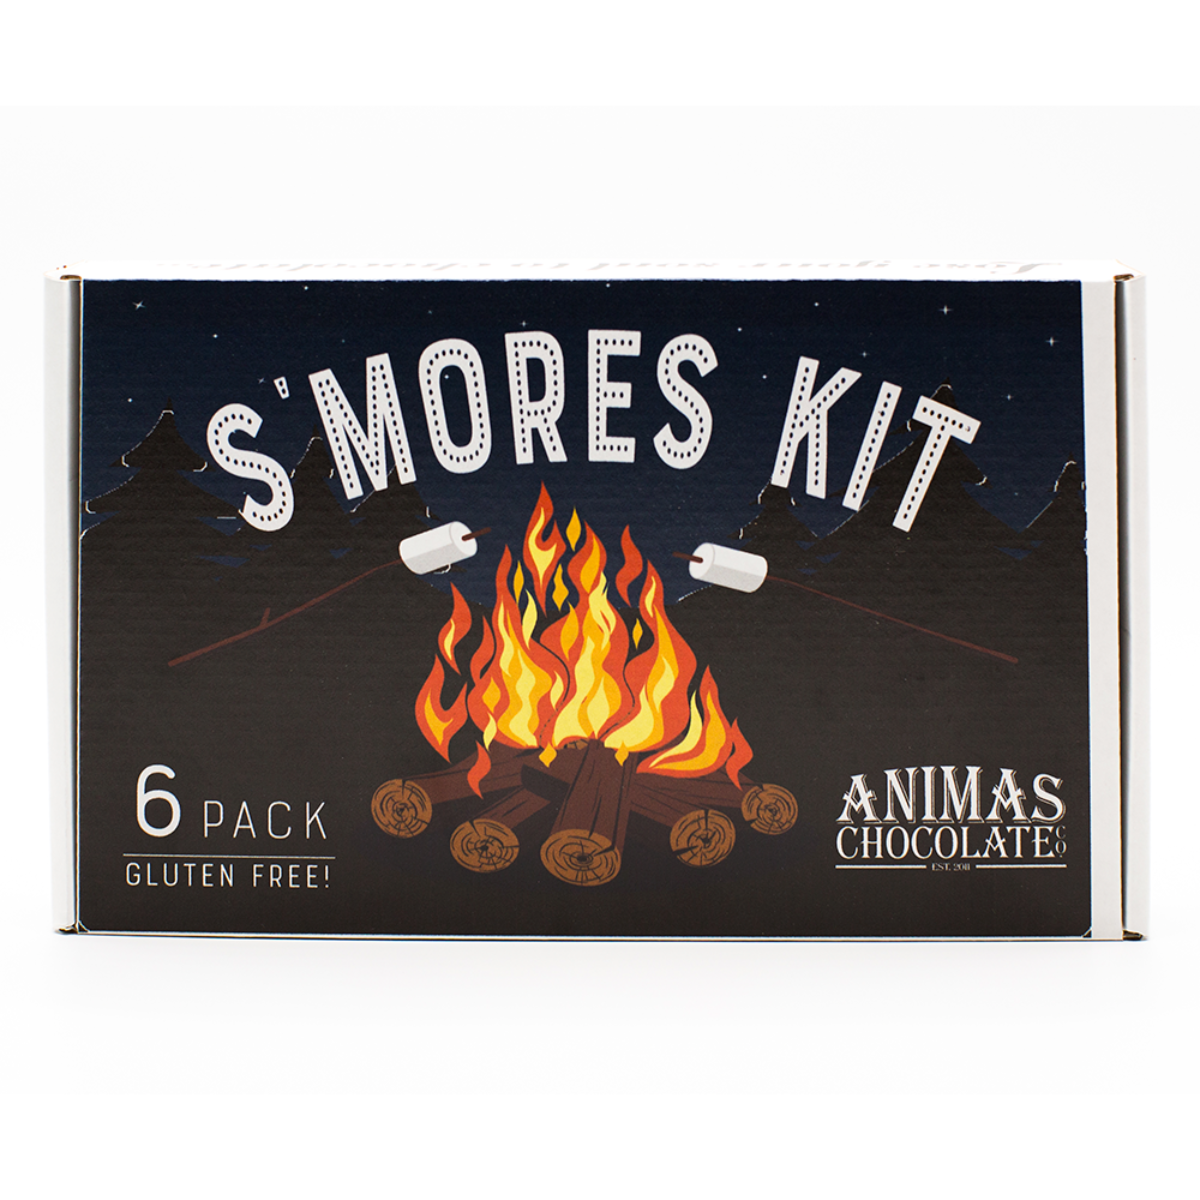 S'mores Zippered Pouch - Tiny Owls Gift Co